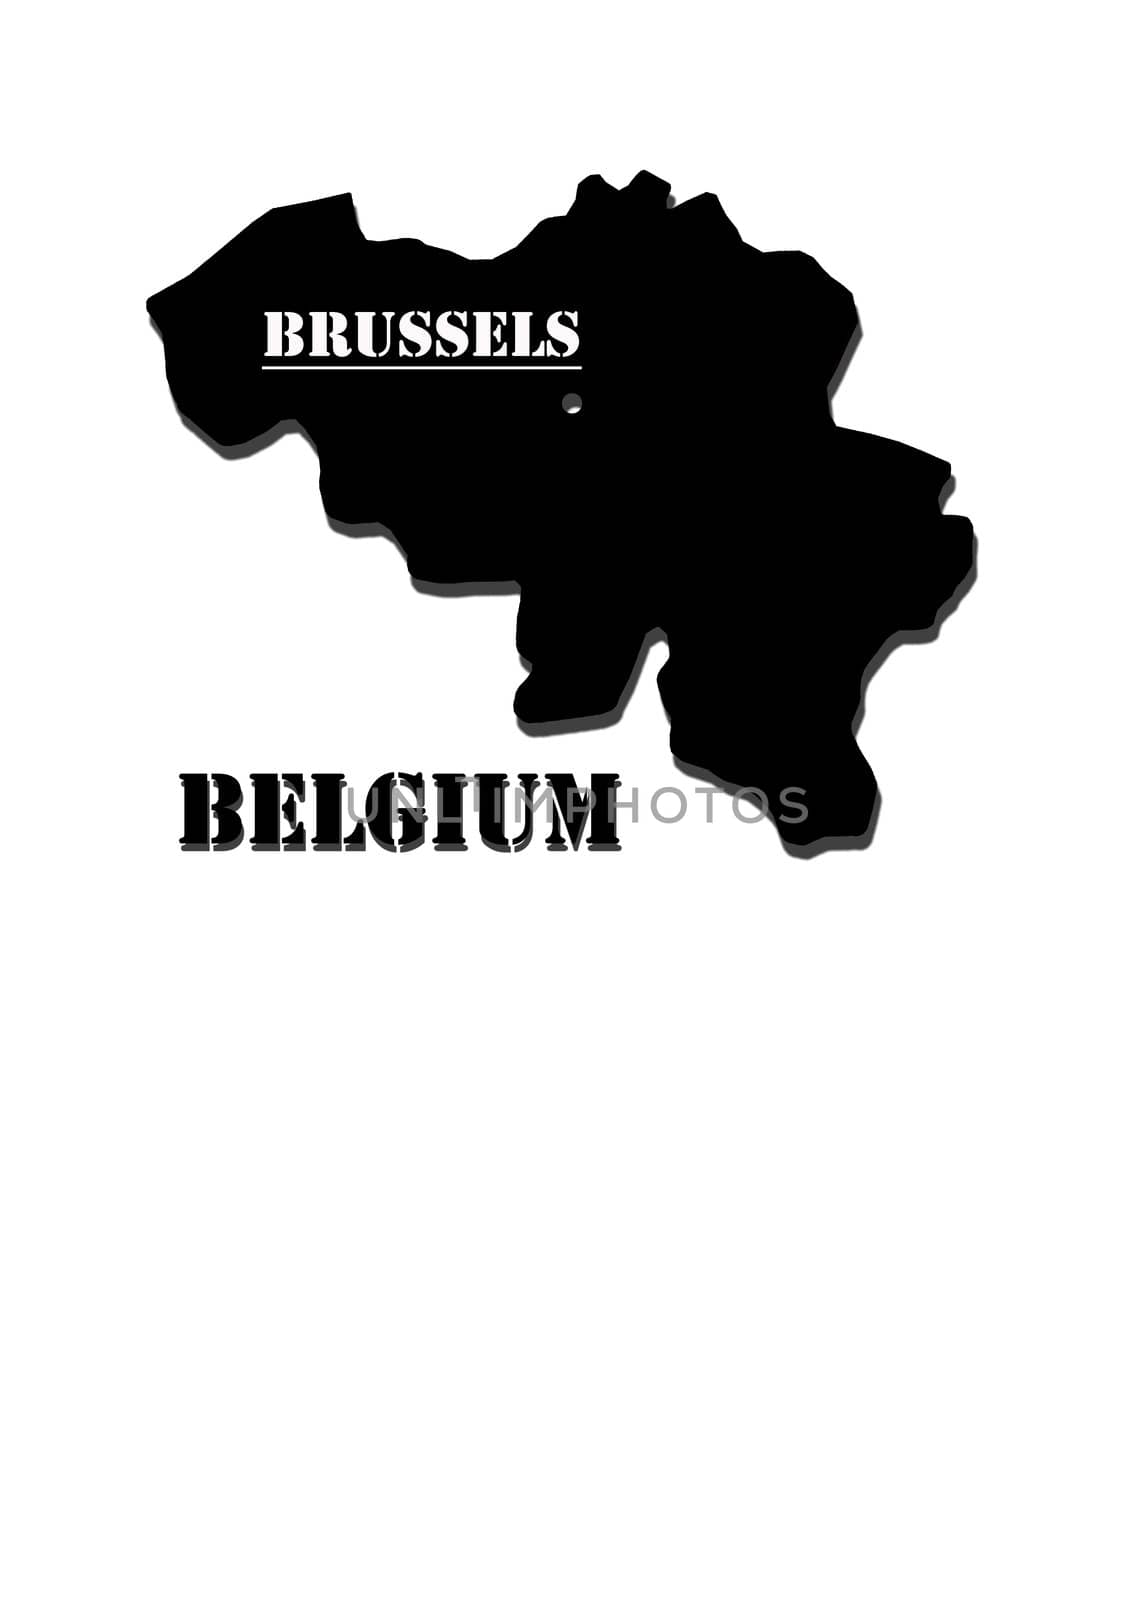 Black silhouette of a map of Belgium with a designation of capital